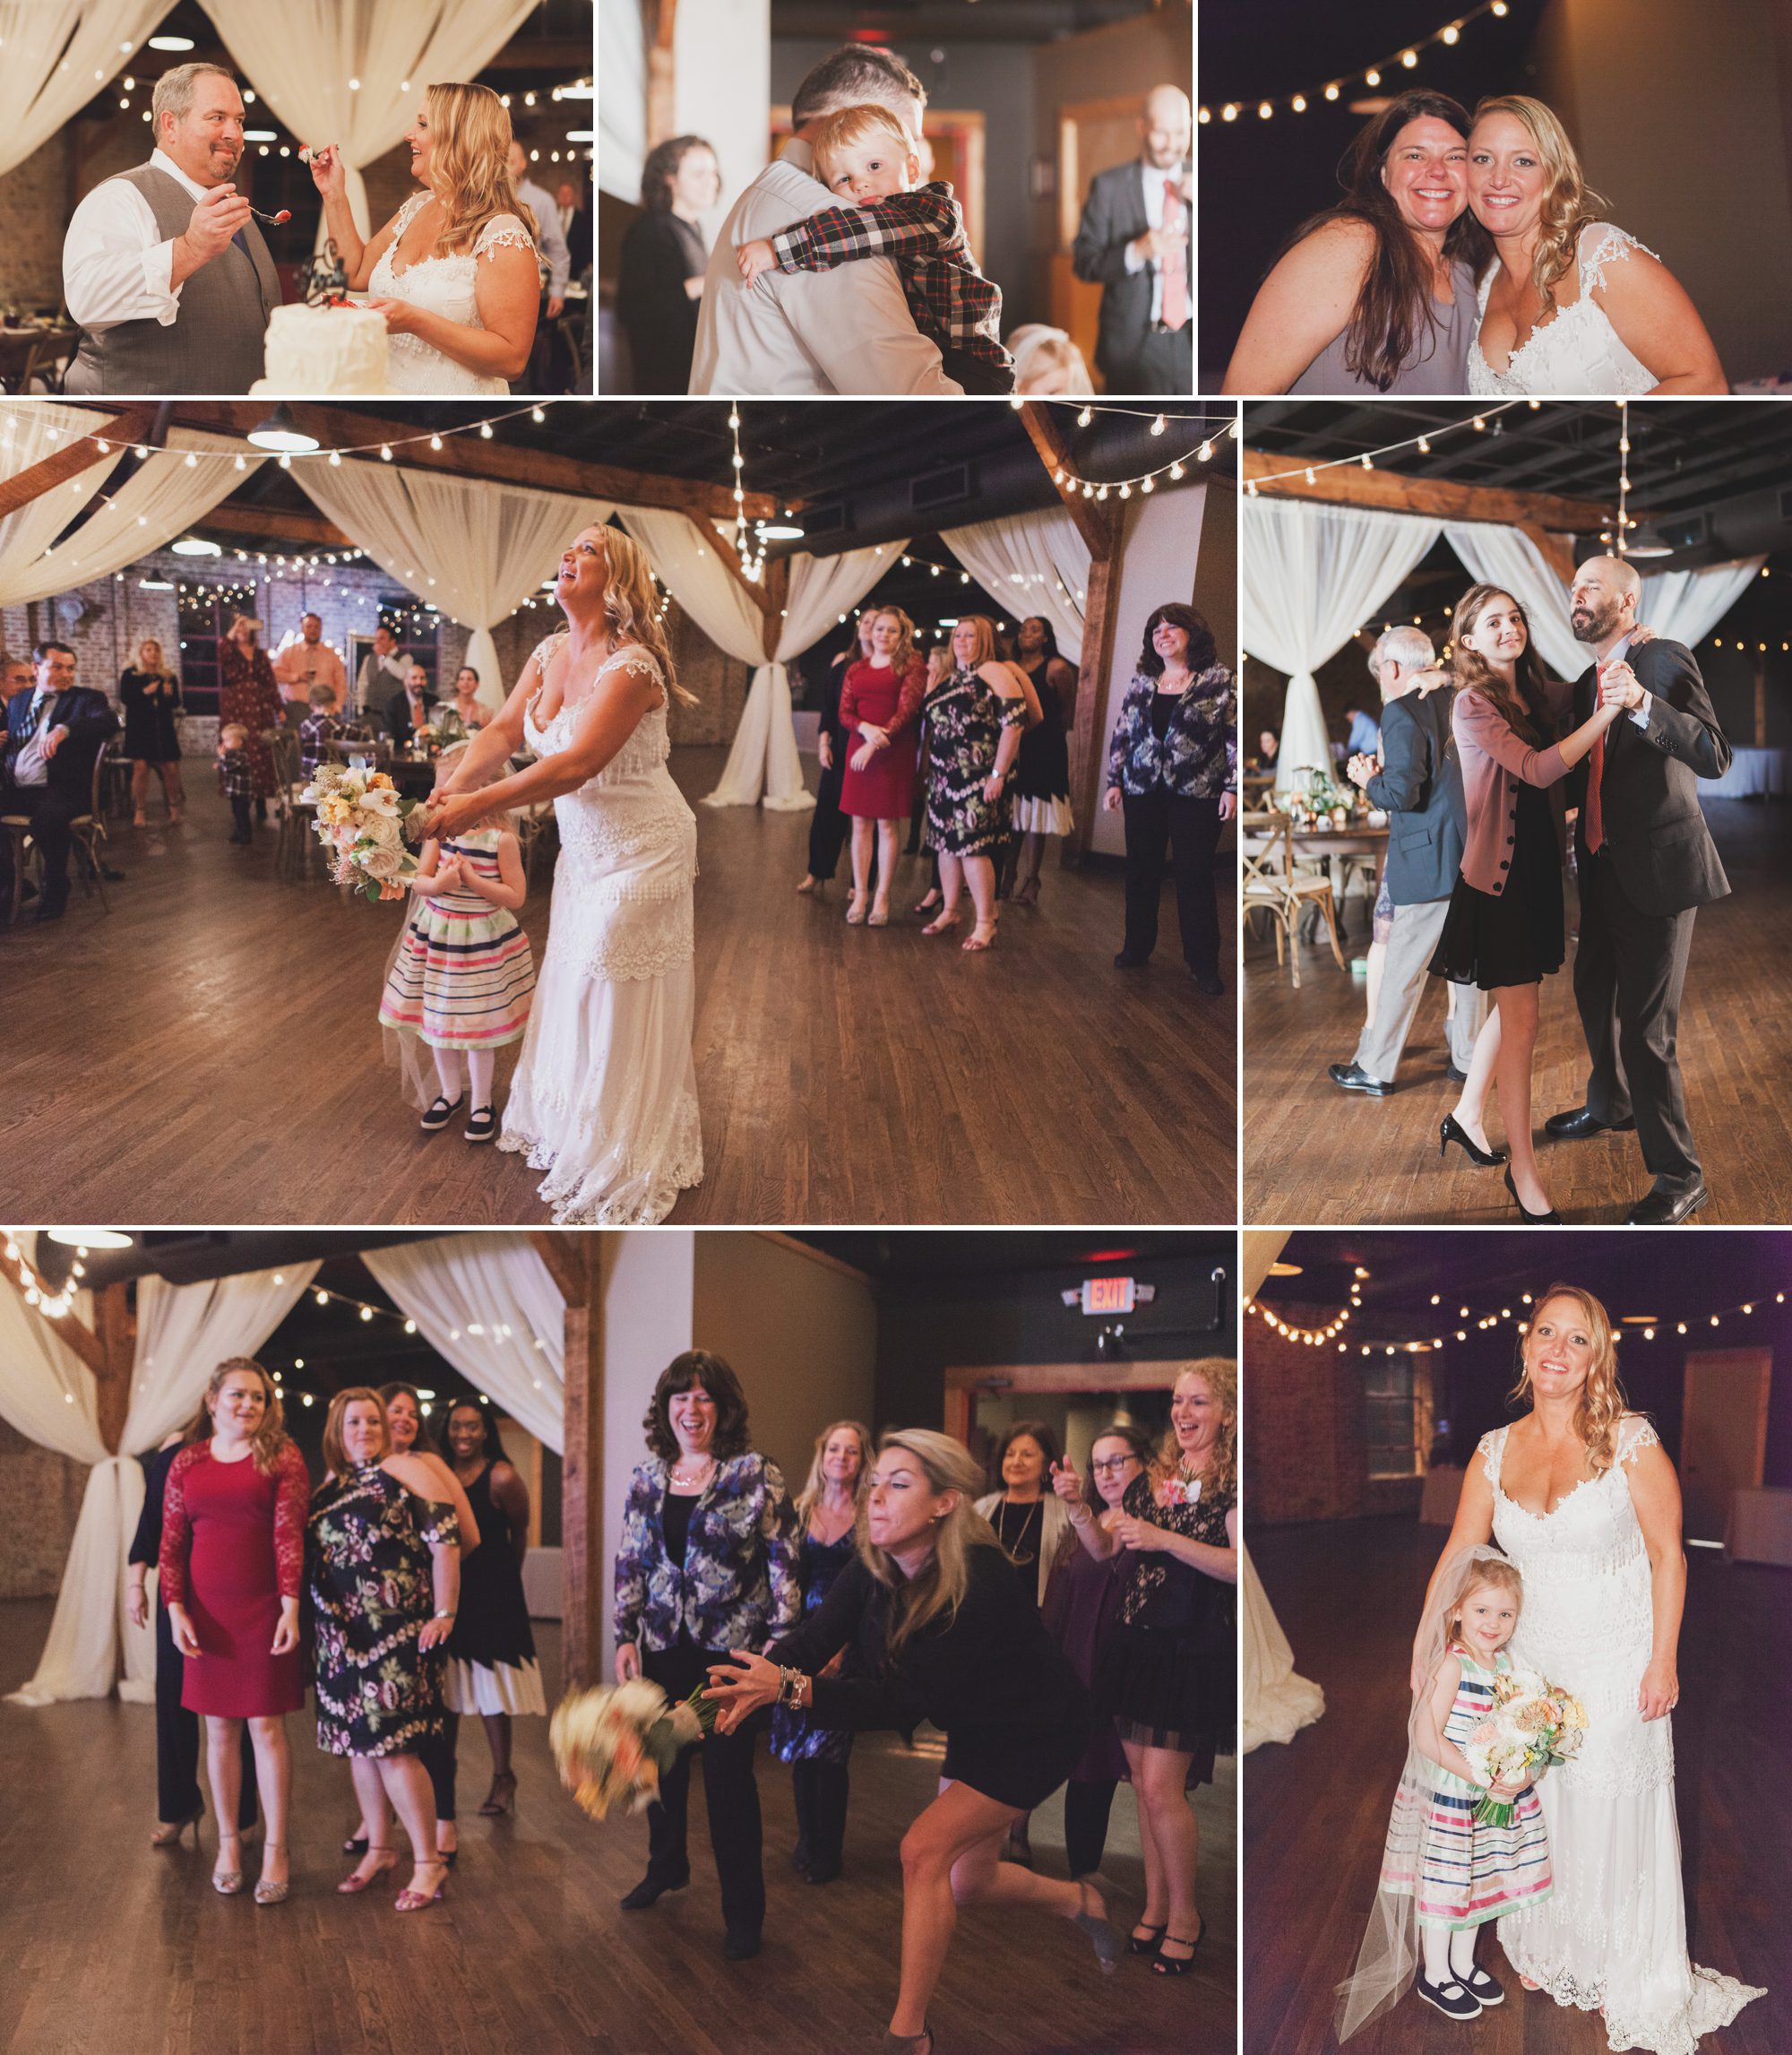 Dancing and bouquet toss after wedding at Houston Station, Nashville TN. Photos by Krista Lee Photography.